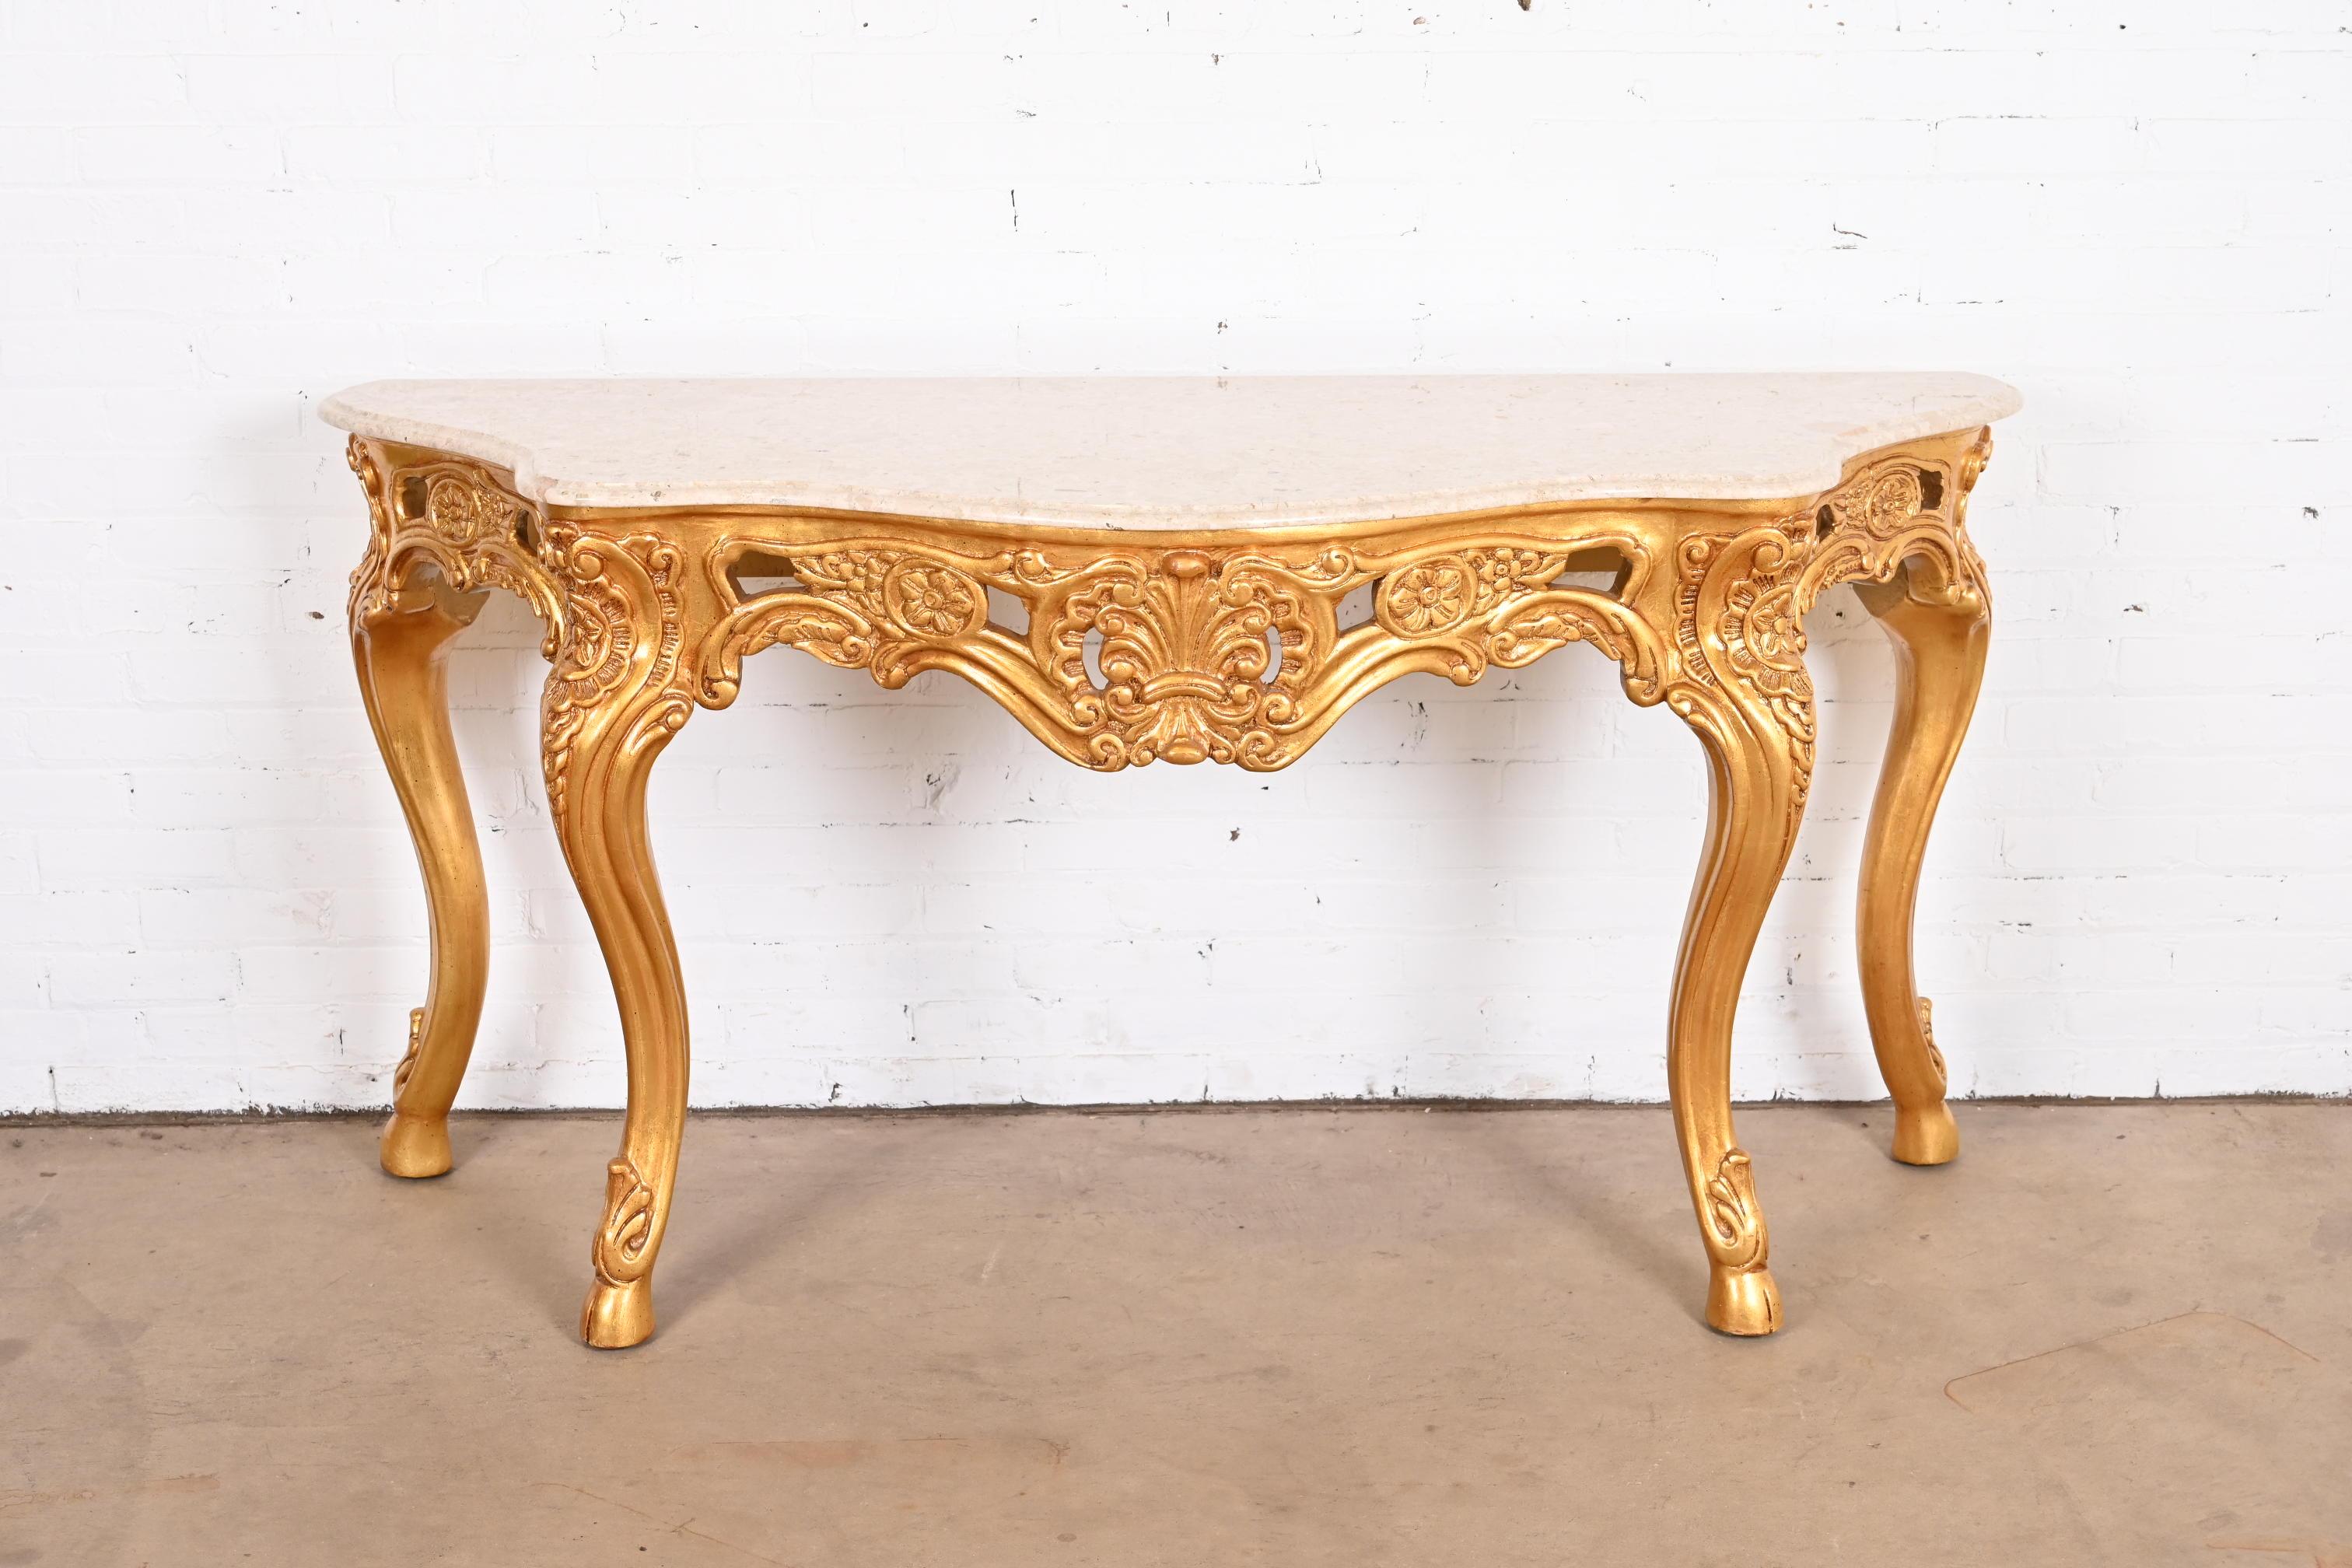 A gorgeous French Baroque or Rococo style console or entry table

Late 20th Century

Carved giltwood, with tan marble top.

Measures: 67.25